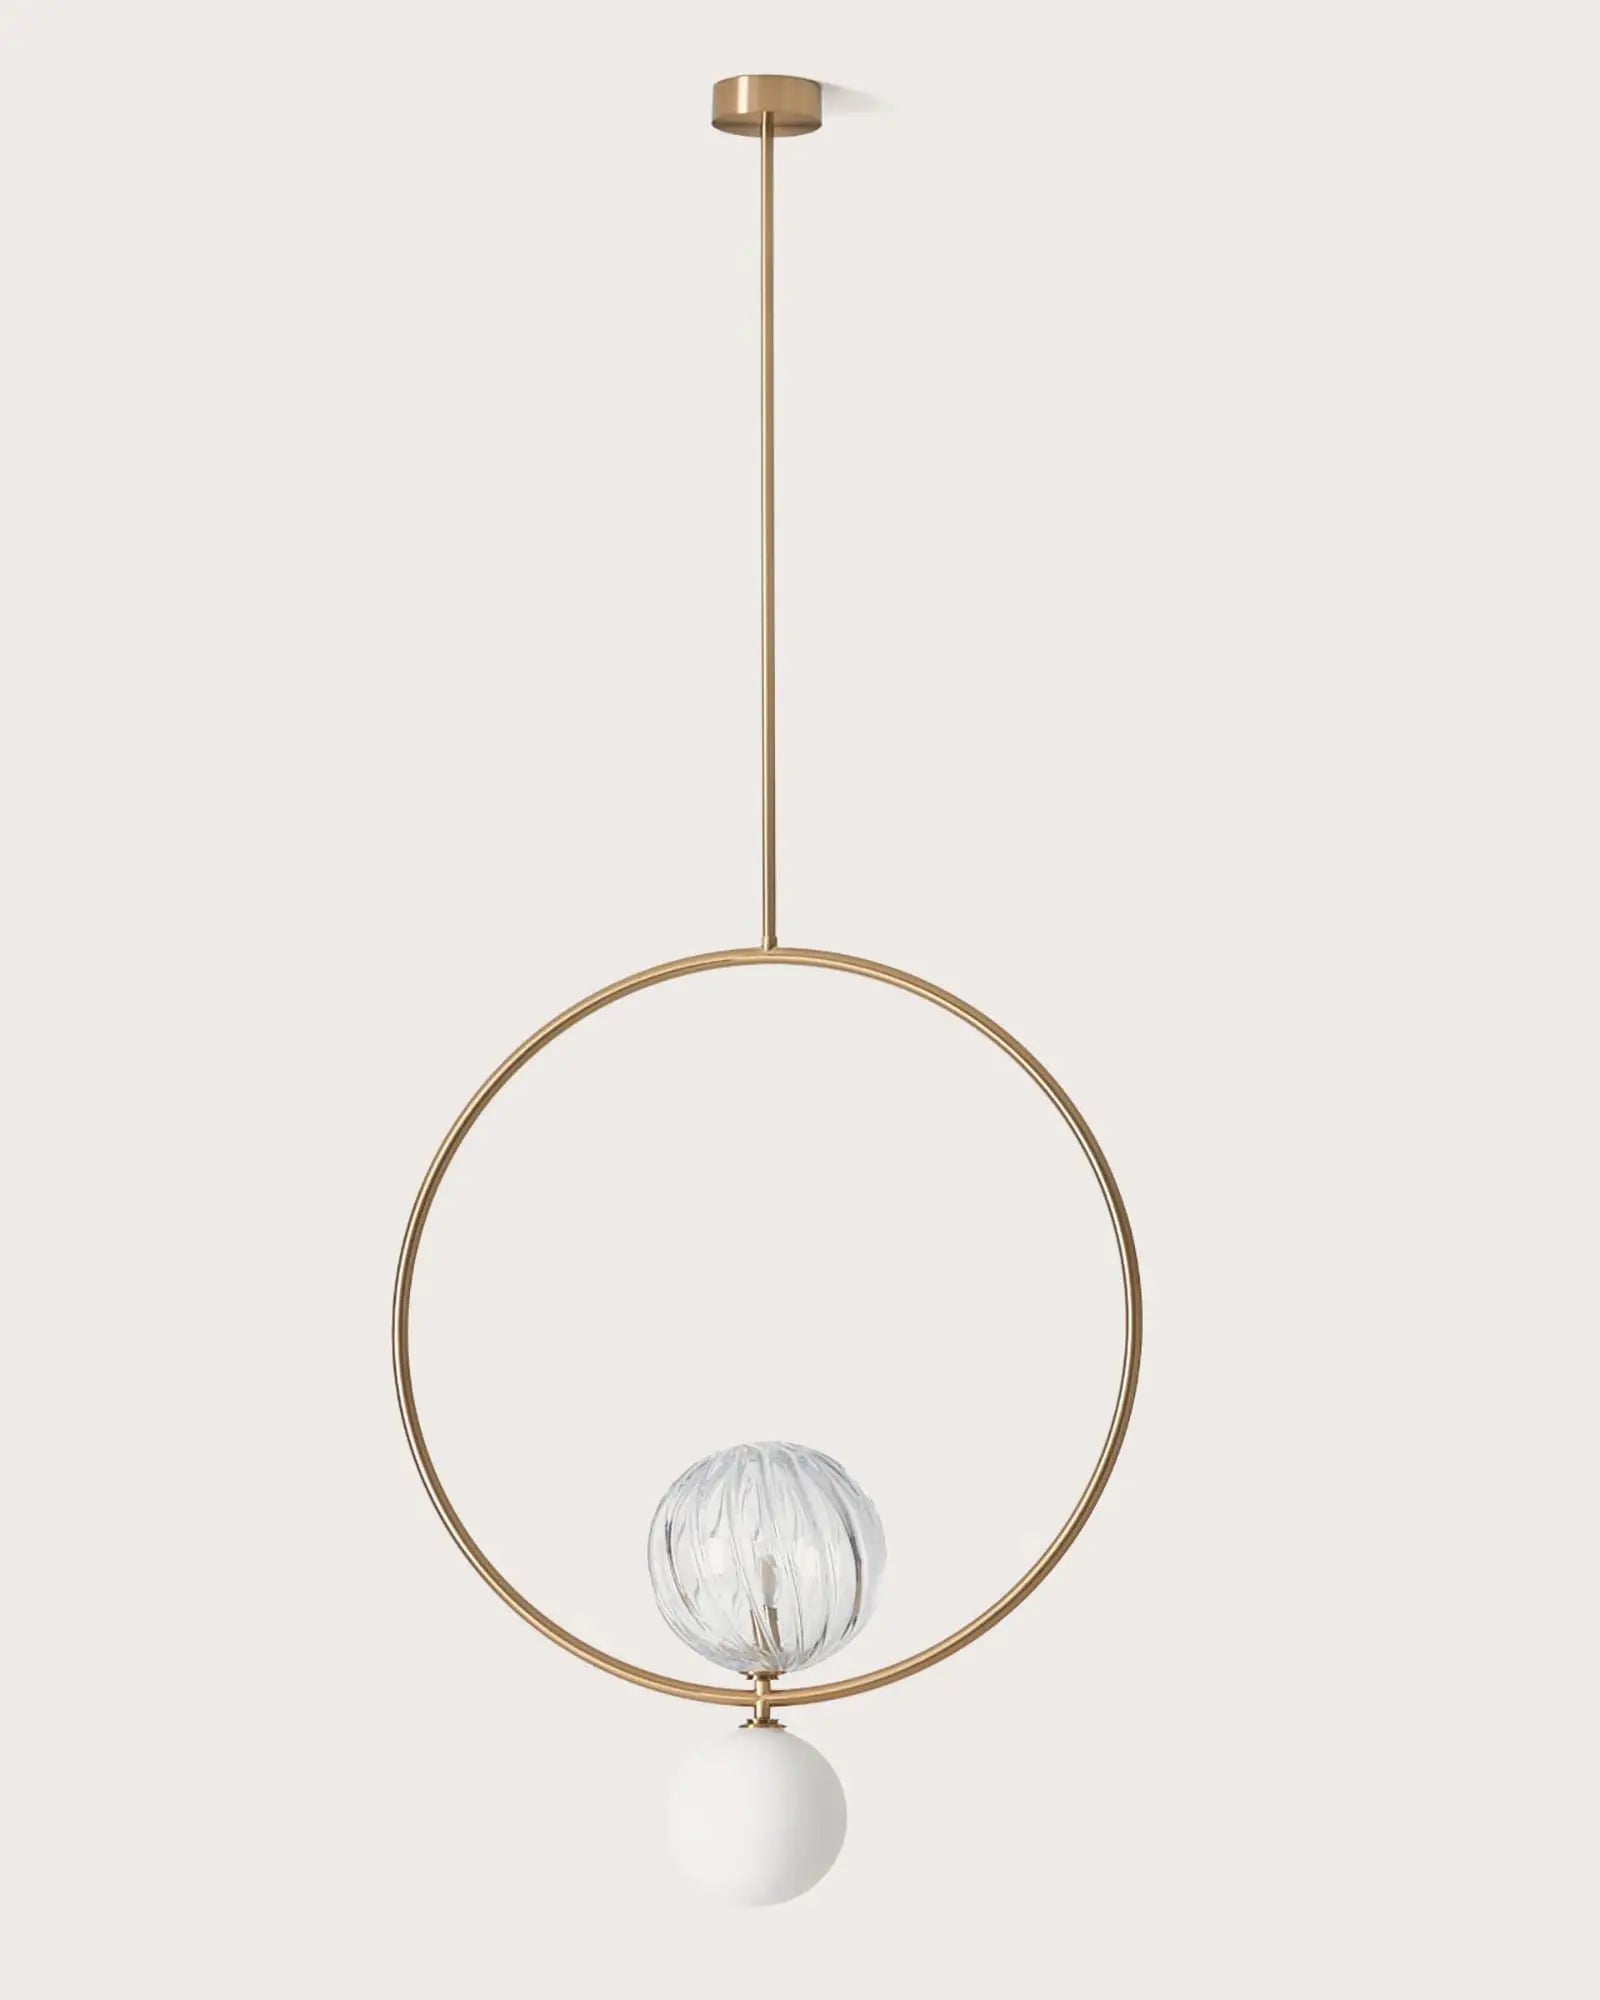 Level Contemporary ring pendant with double orb in brass